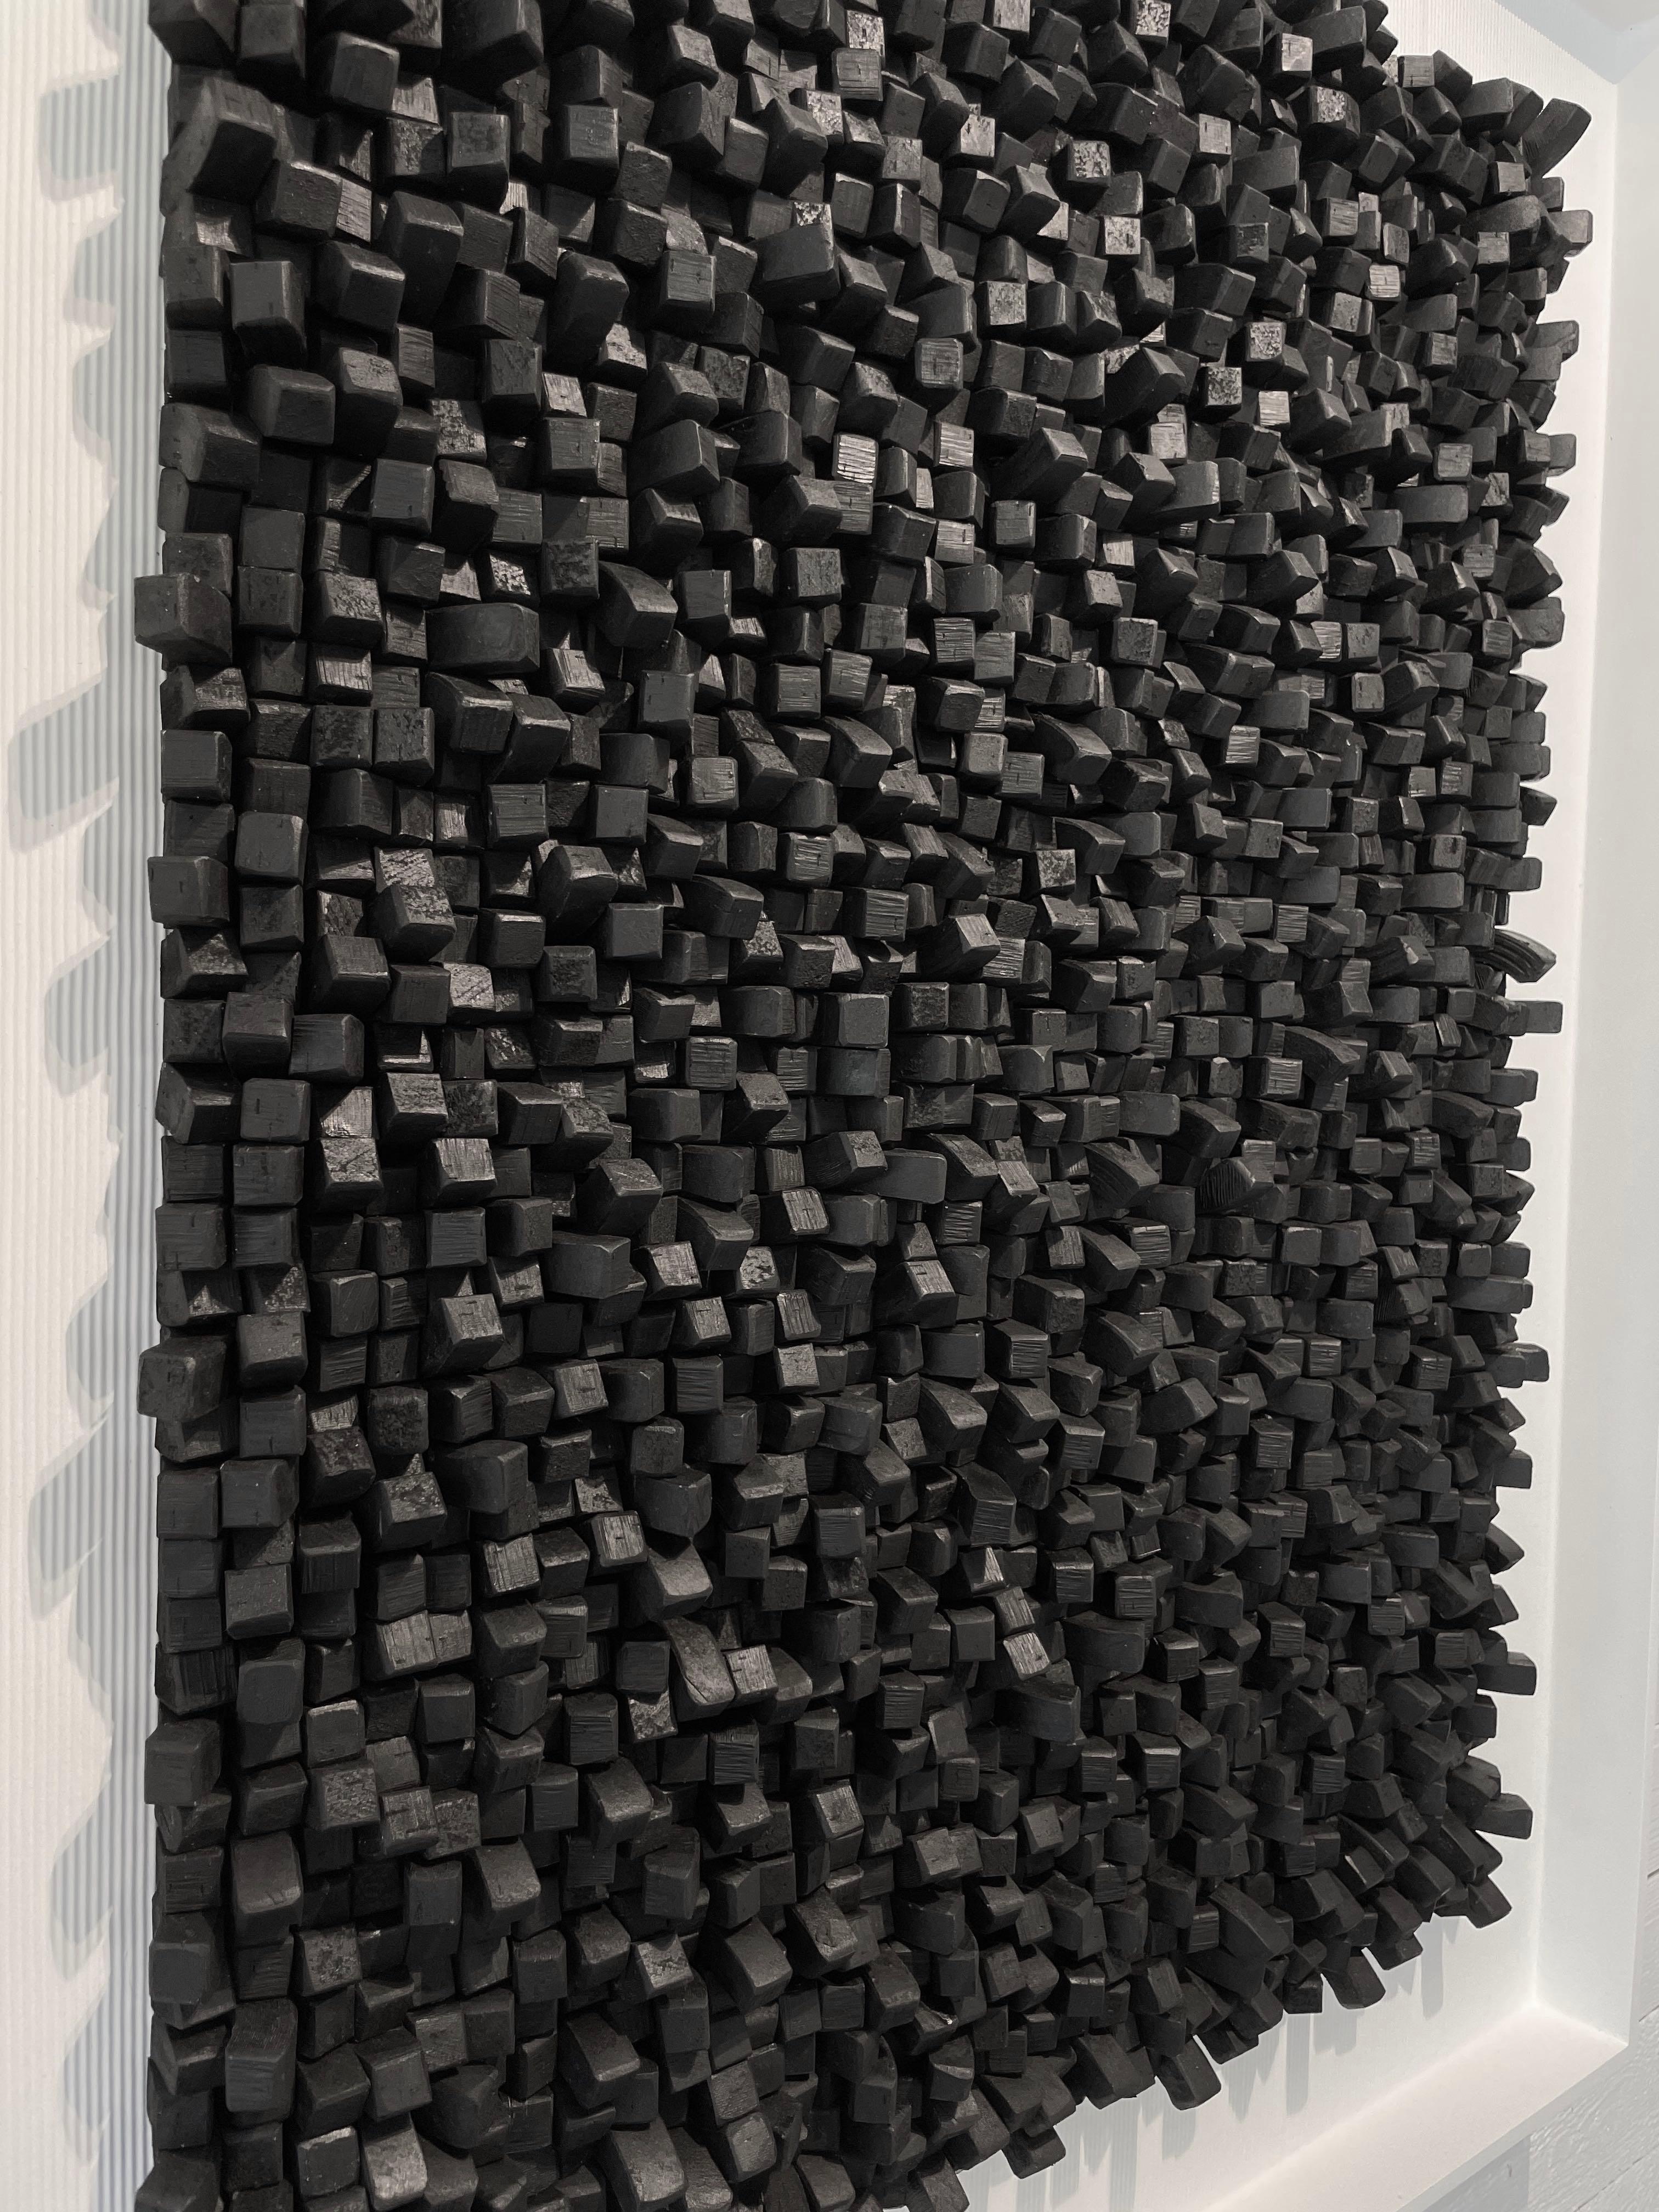 Charcoal Wall Sculpture by Belgian Artist Guy Leclef, Belgium, Contemporary 2